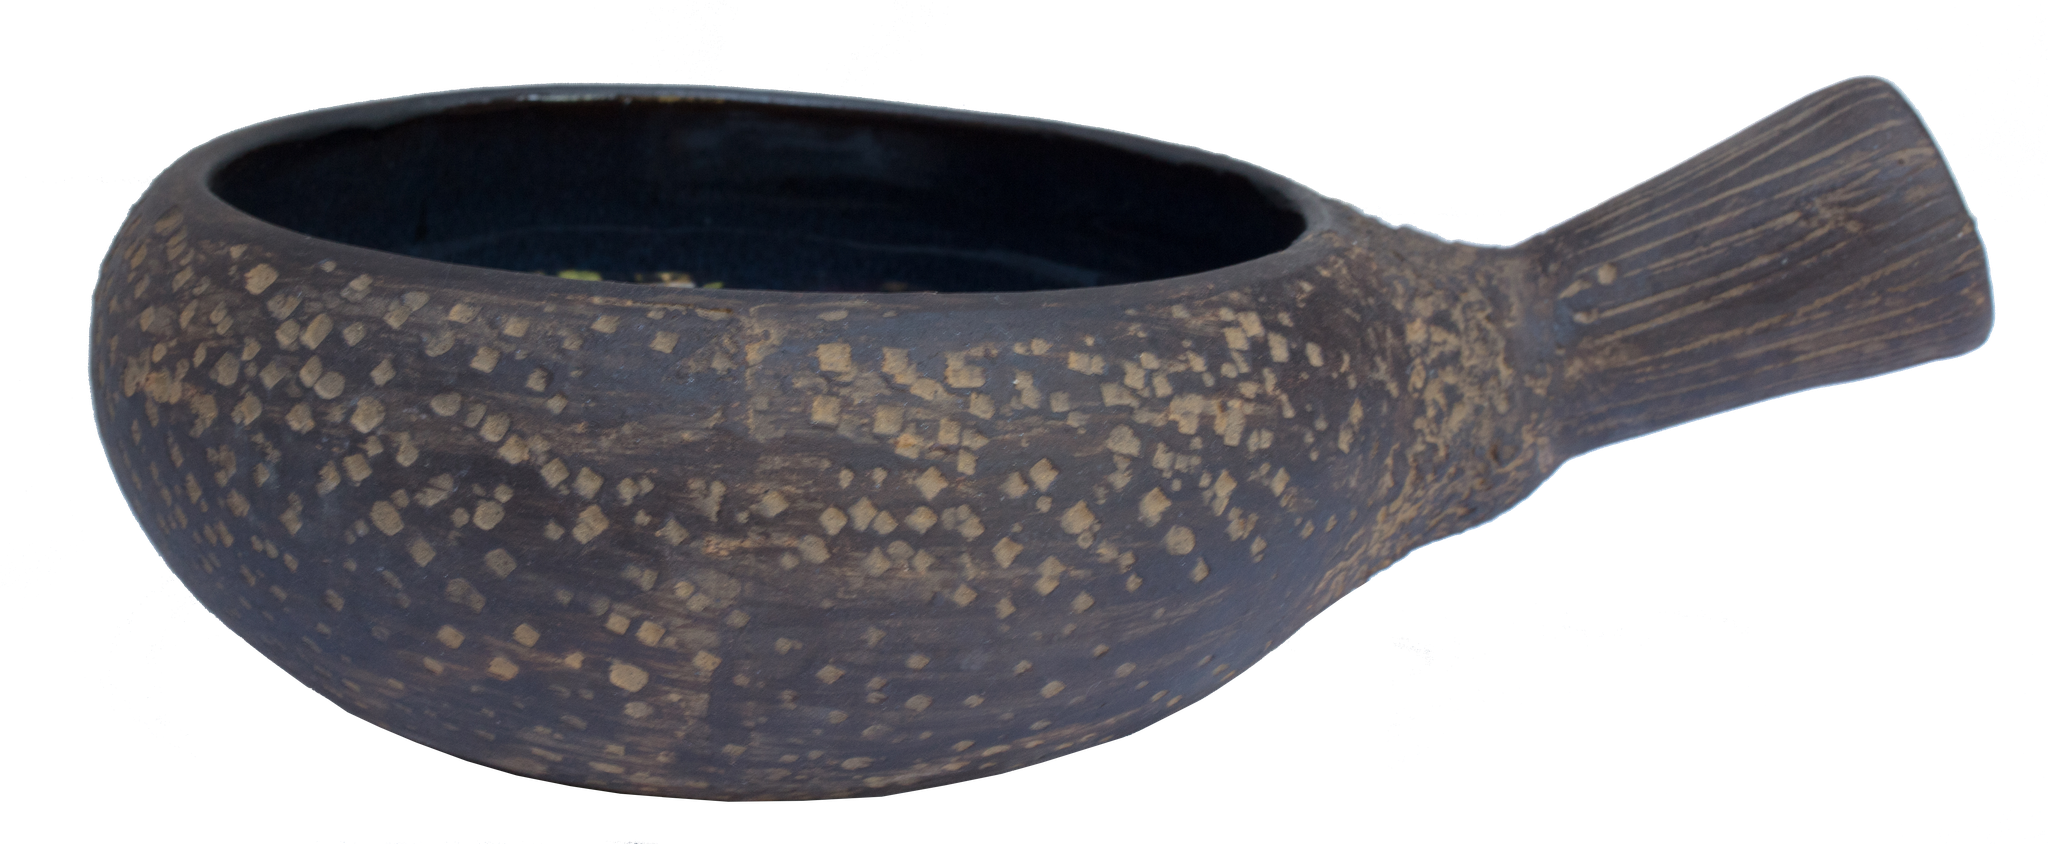 Earth Bowl with handle Blue speckle 15.75cm with handle 28cm